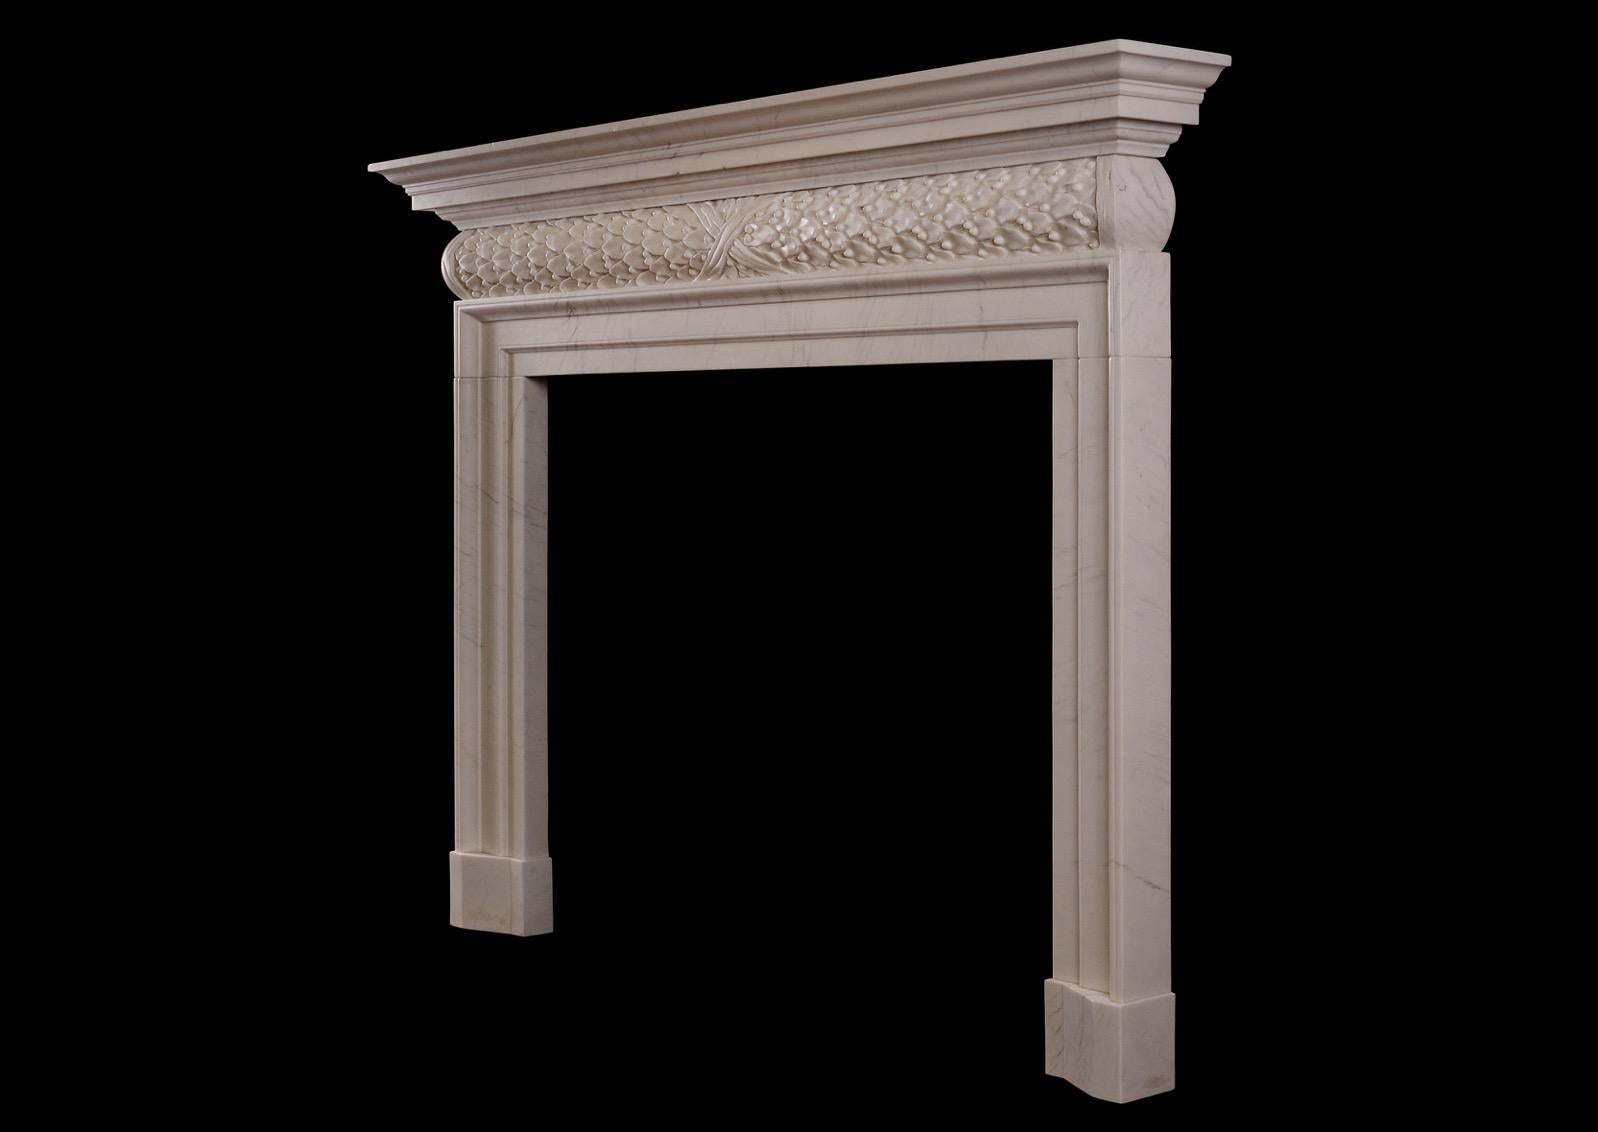 English Mid-18th Century Style White Marble Fireplace For Sale